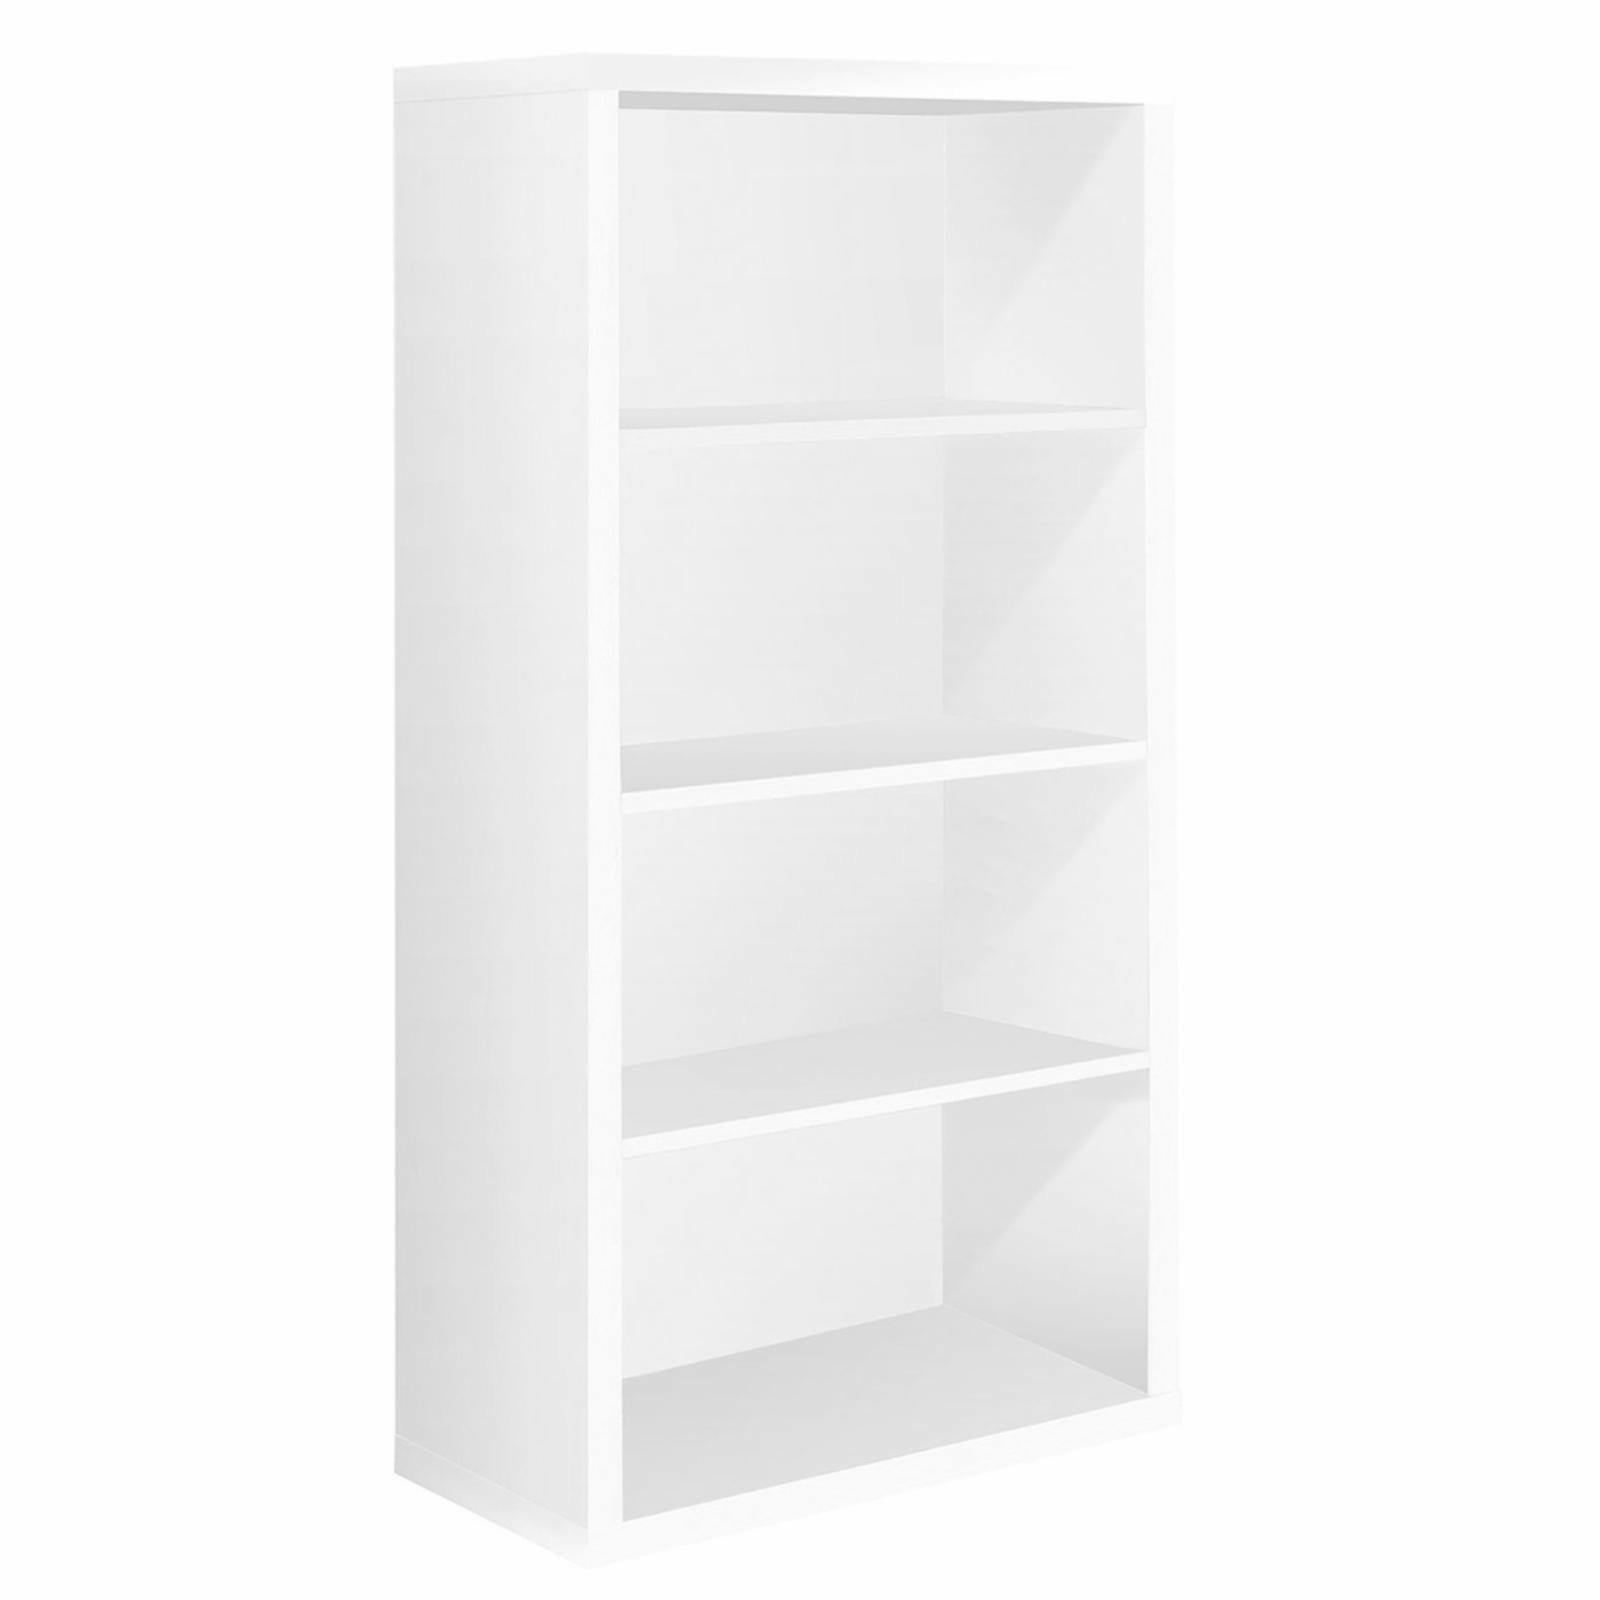 Sleek Contemporary White Bookcase with Adjustable Shelves